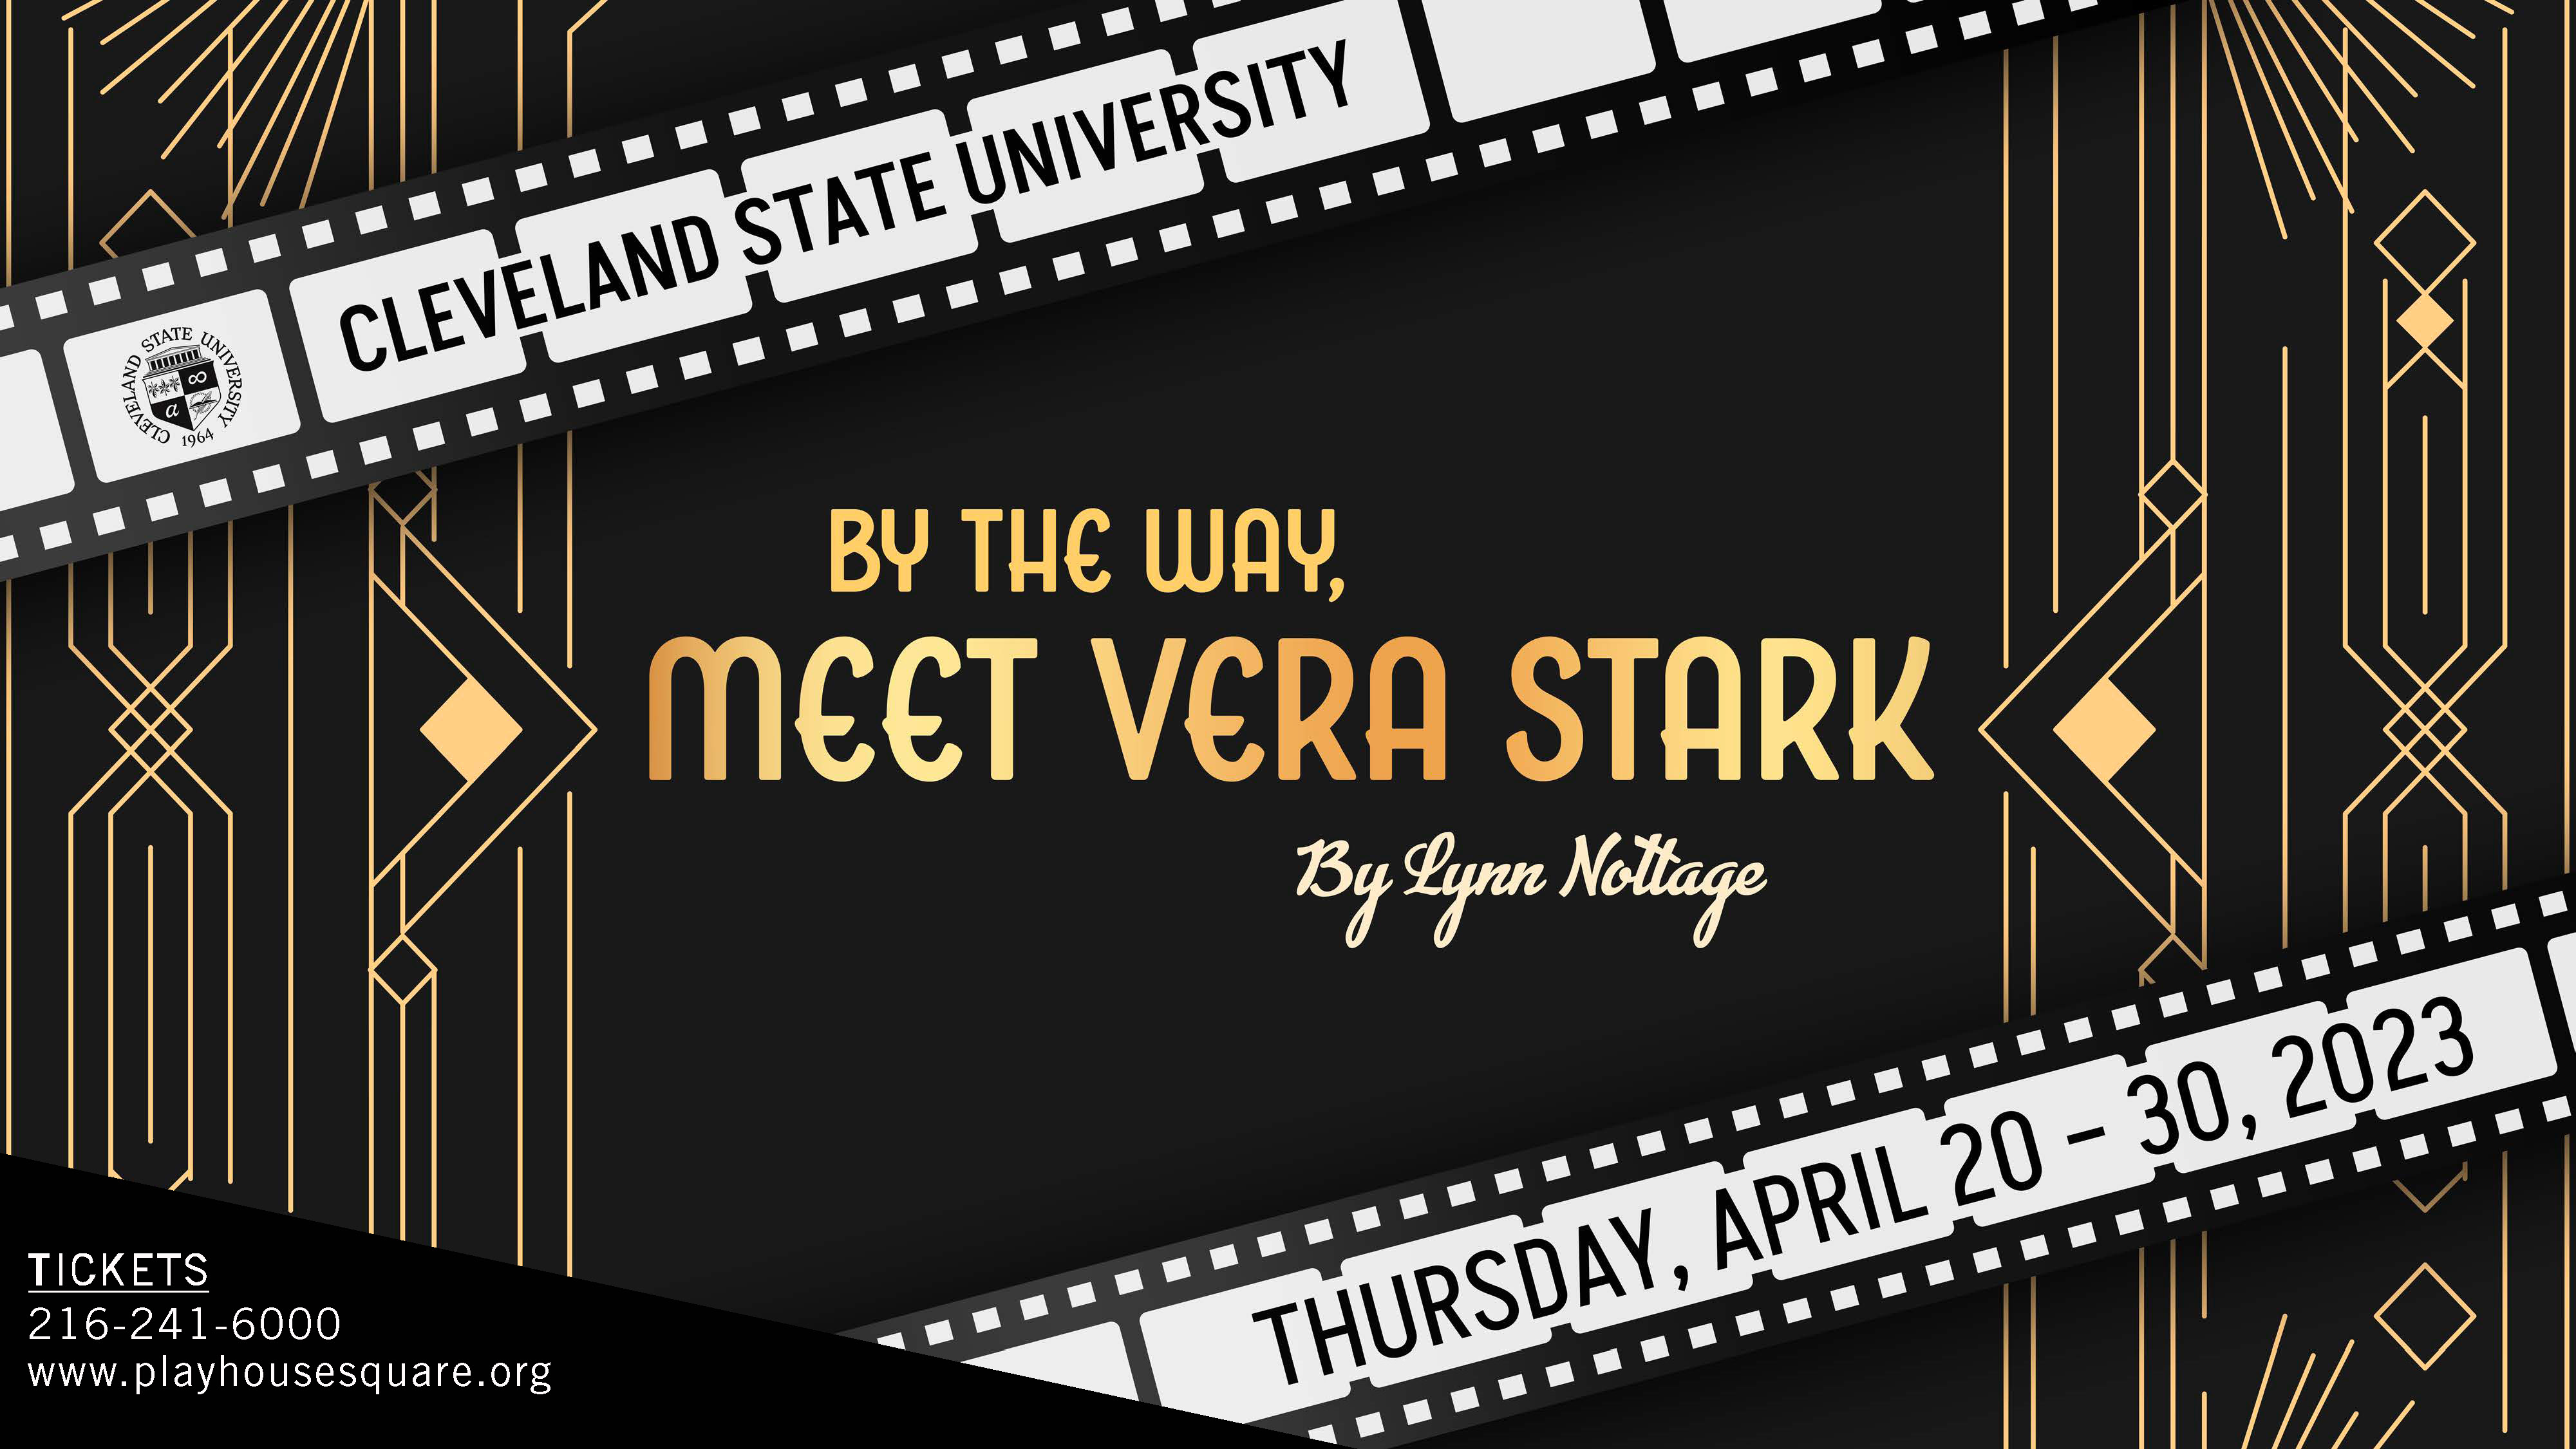 1930s movie glamour with Lynn Nottage’s comedy “By the Way, Meet Vera Stark” at Playhouse Square